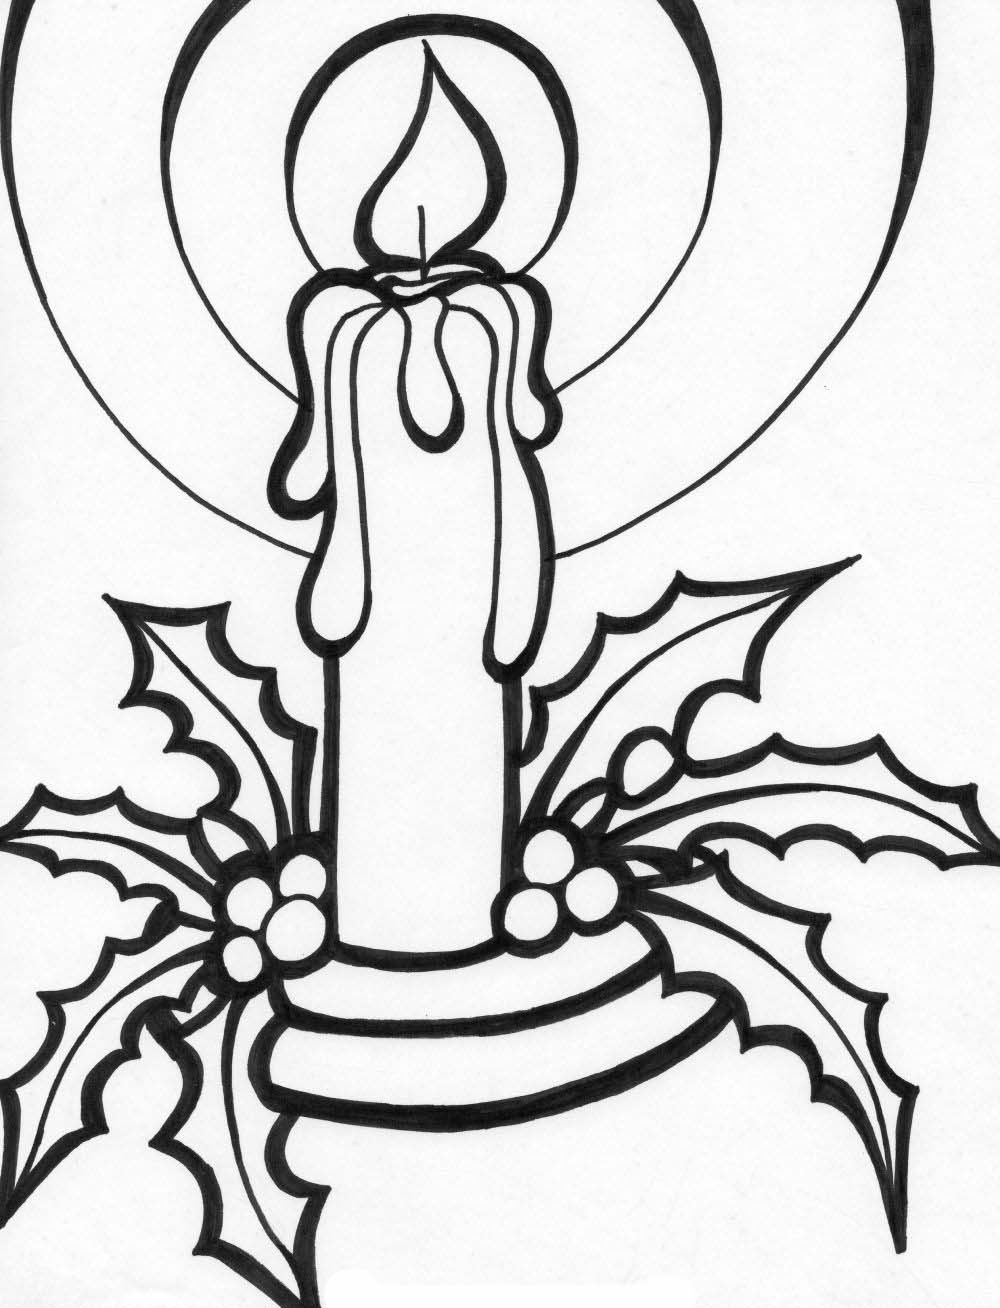 Church Candles Coloring Pages To Print